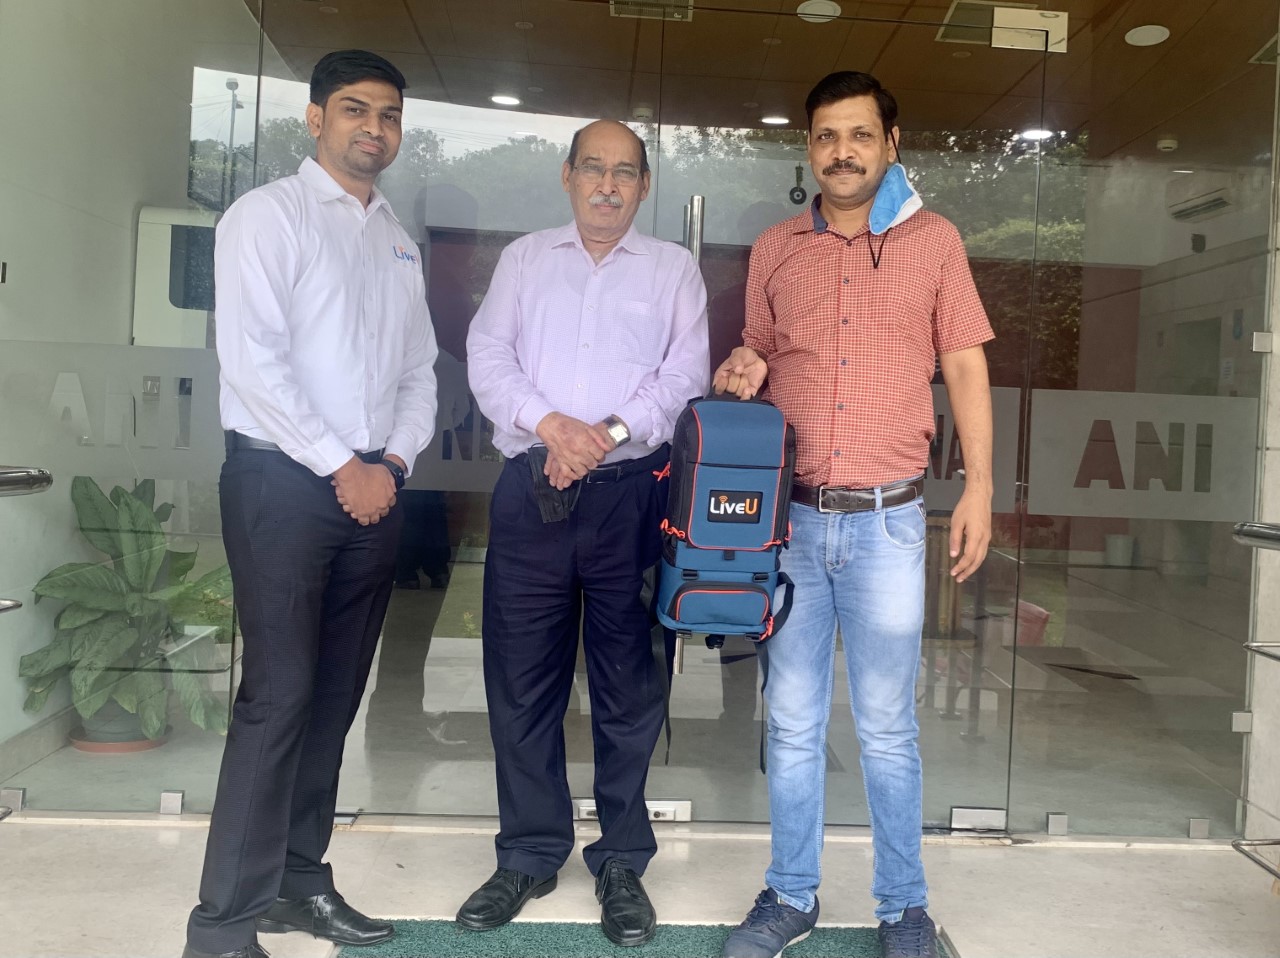 India-based ANI Expands its Live Newsgathering Capabilities with LiveU’s LU800 Multi-Cam Solution